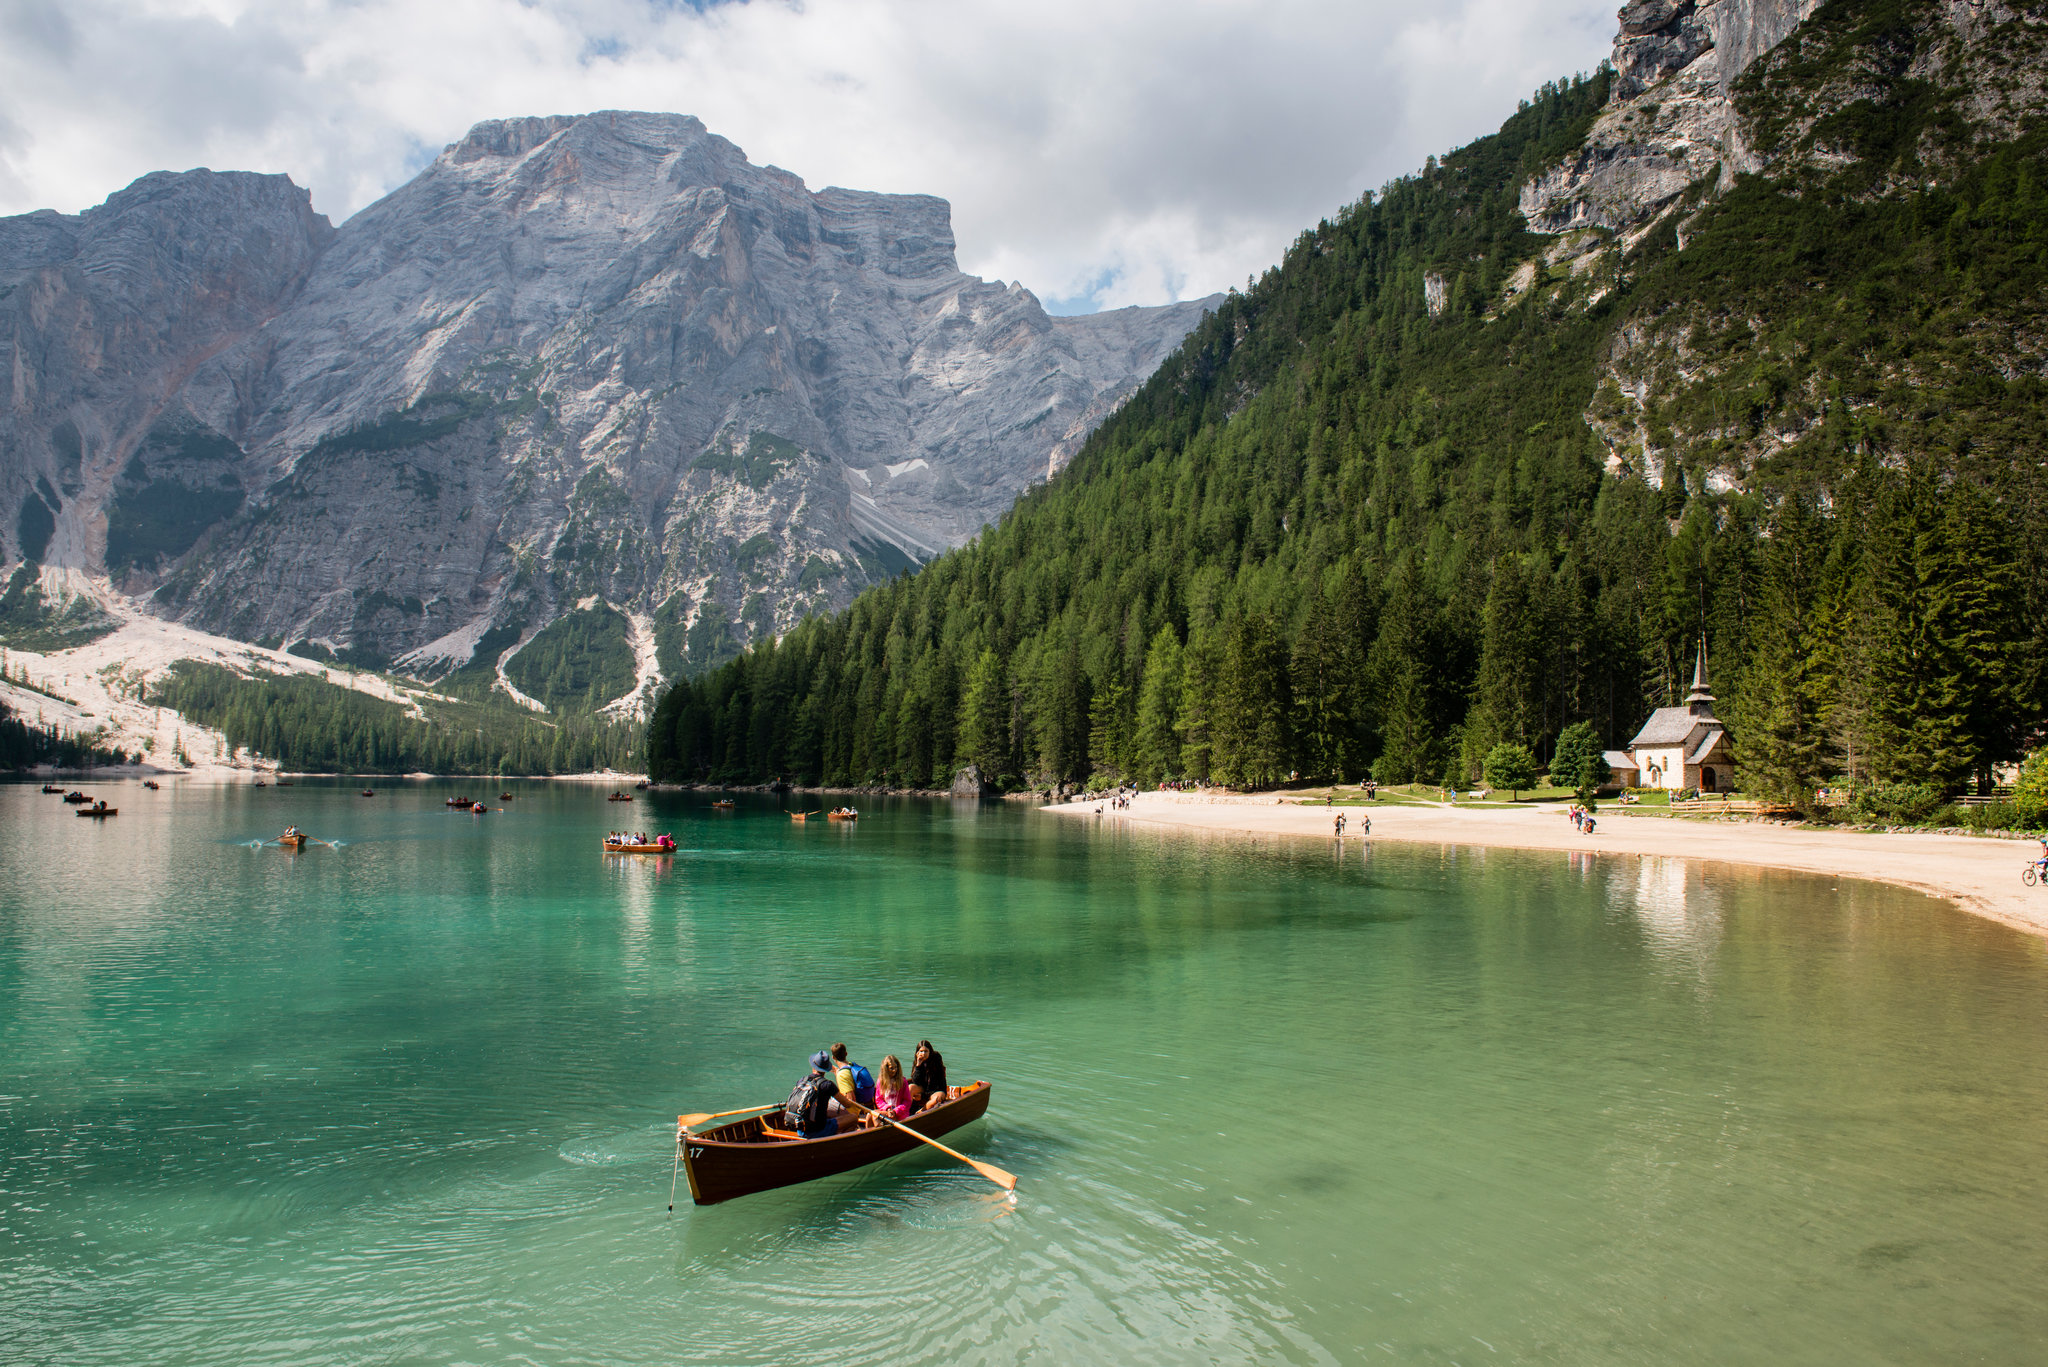 Tourists on the lake in Dolomite area in Northern Italy